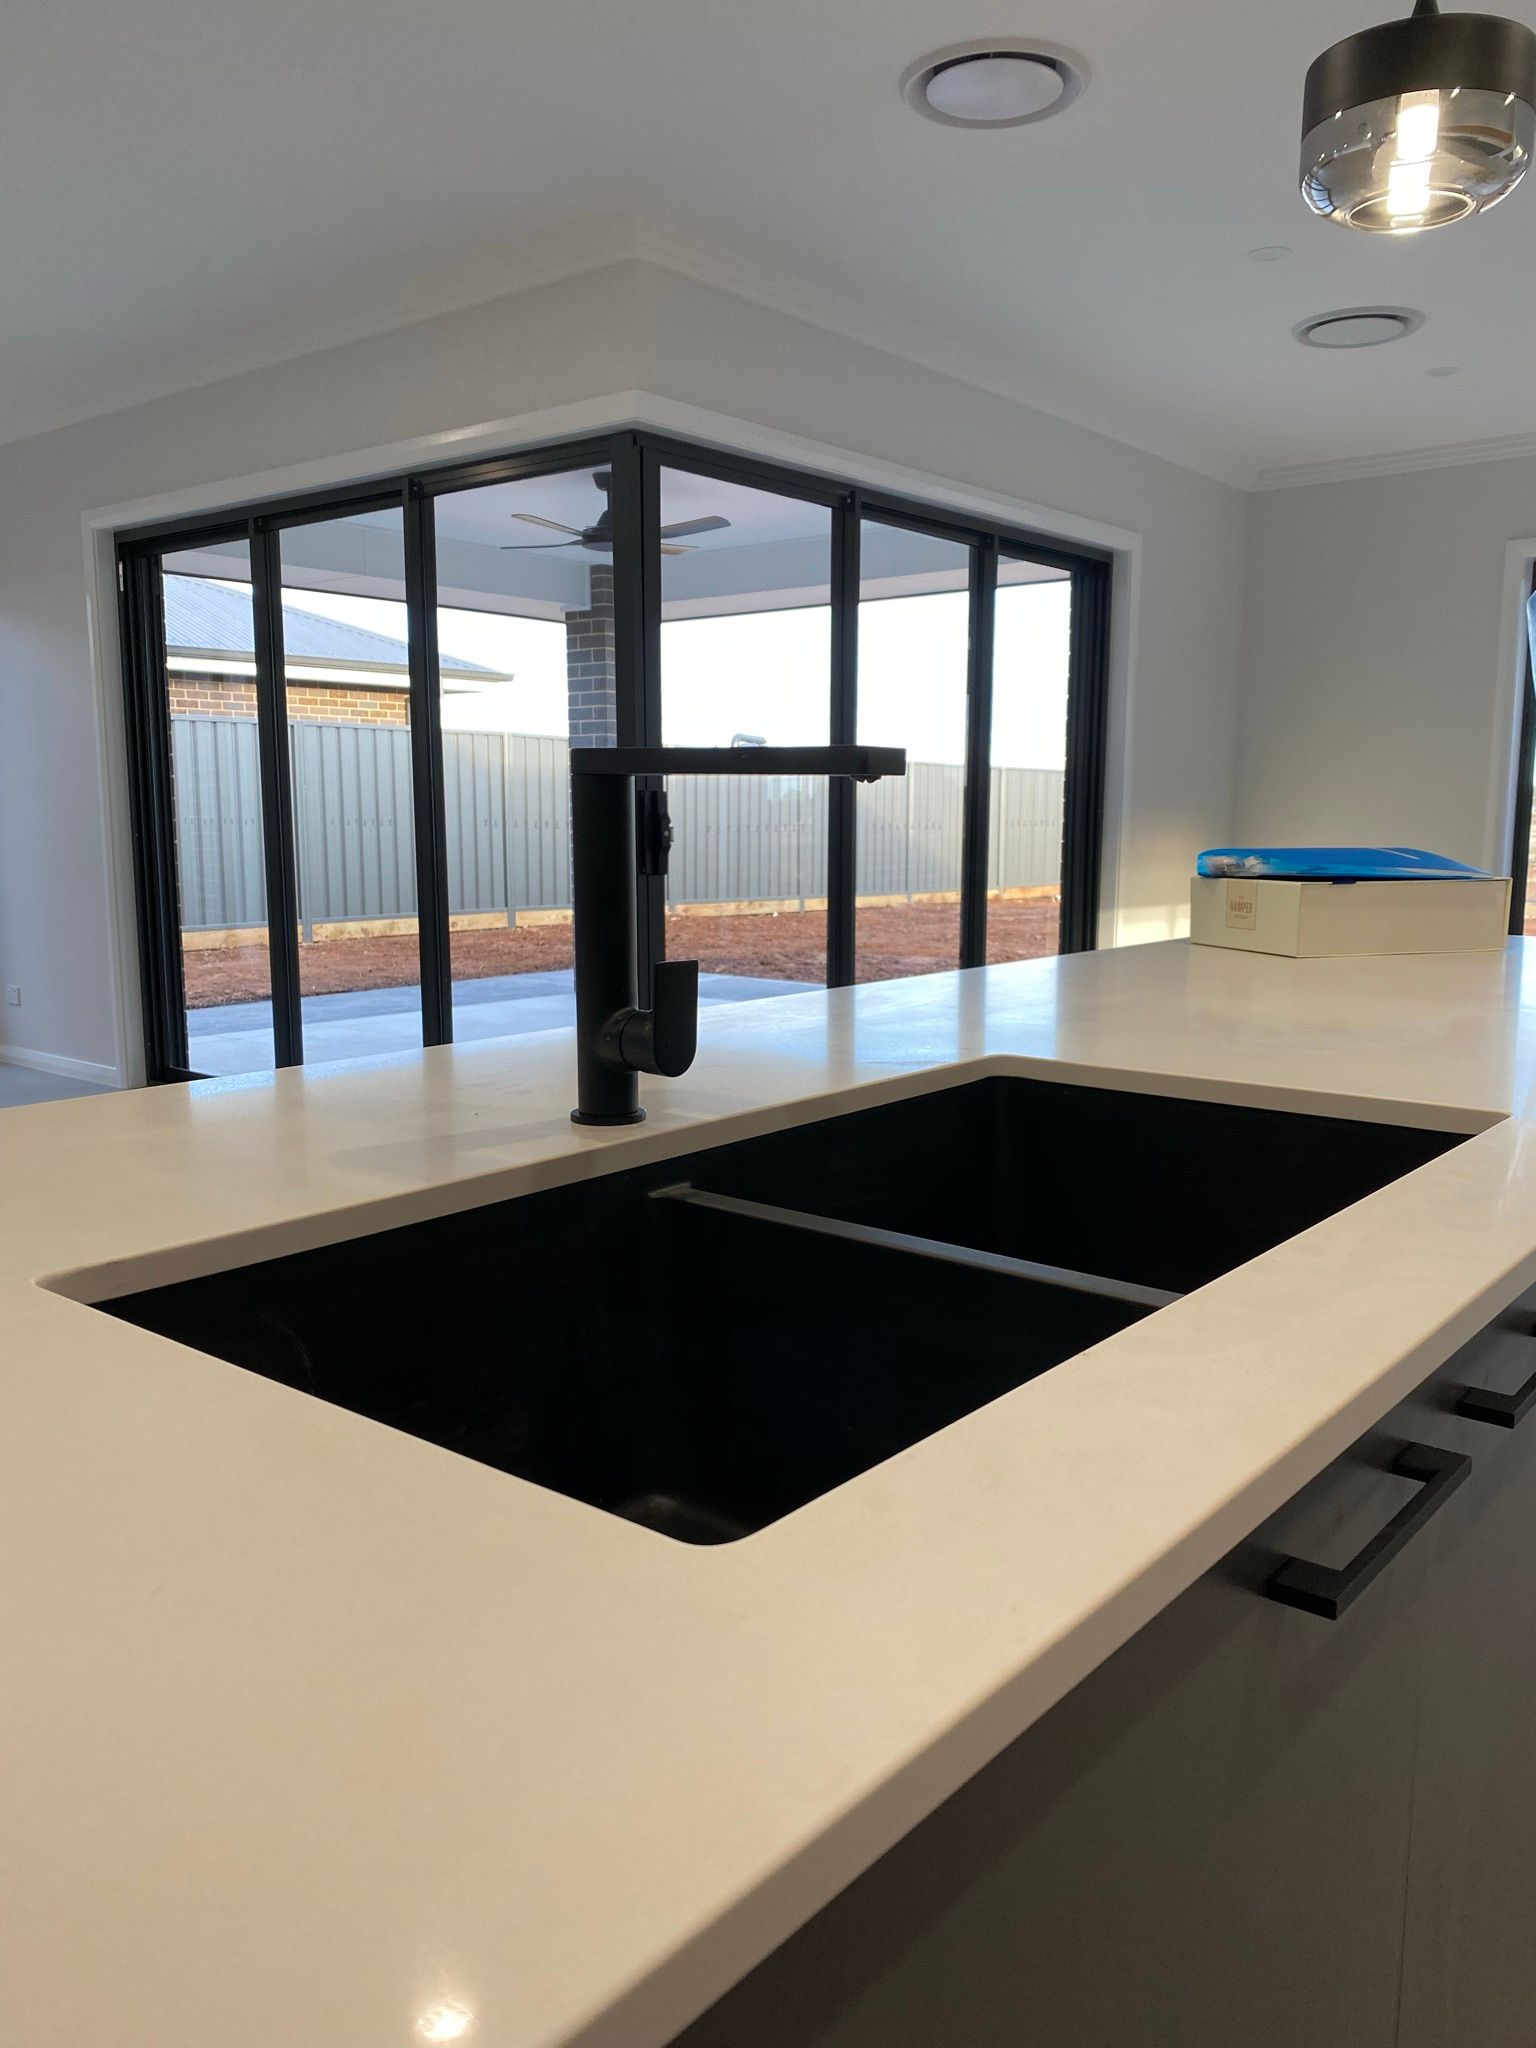 Side View of Black Kitchen Sink and Tap Water in The Kitchen — Kitchen Renovations in Dubbo, QLD